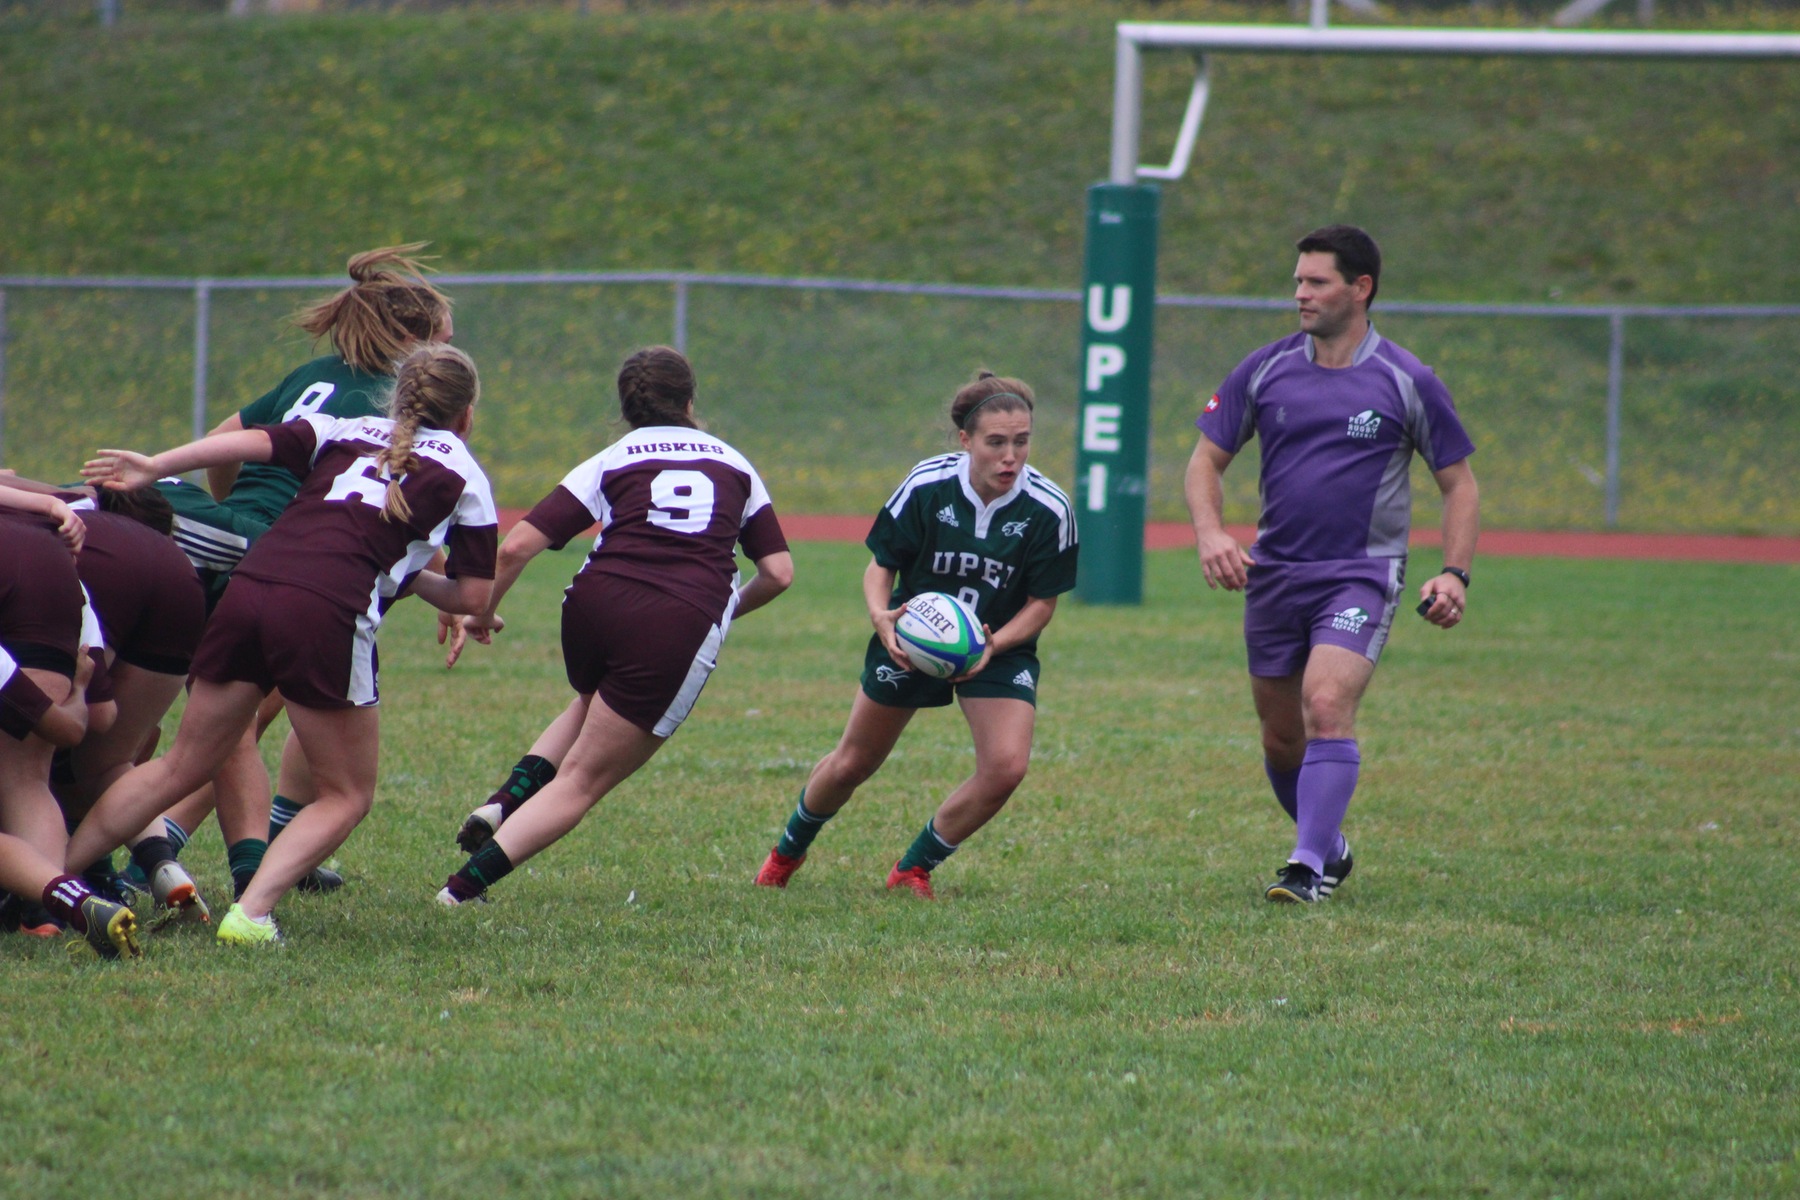 Panthers top Huskies in rugby action